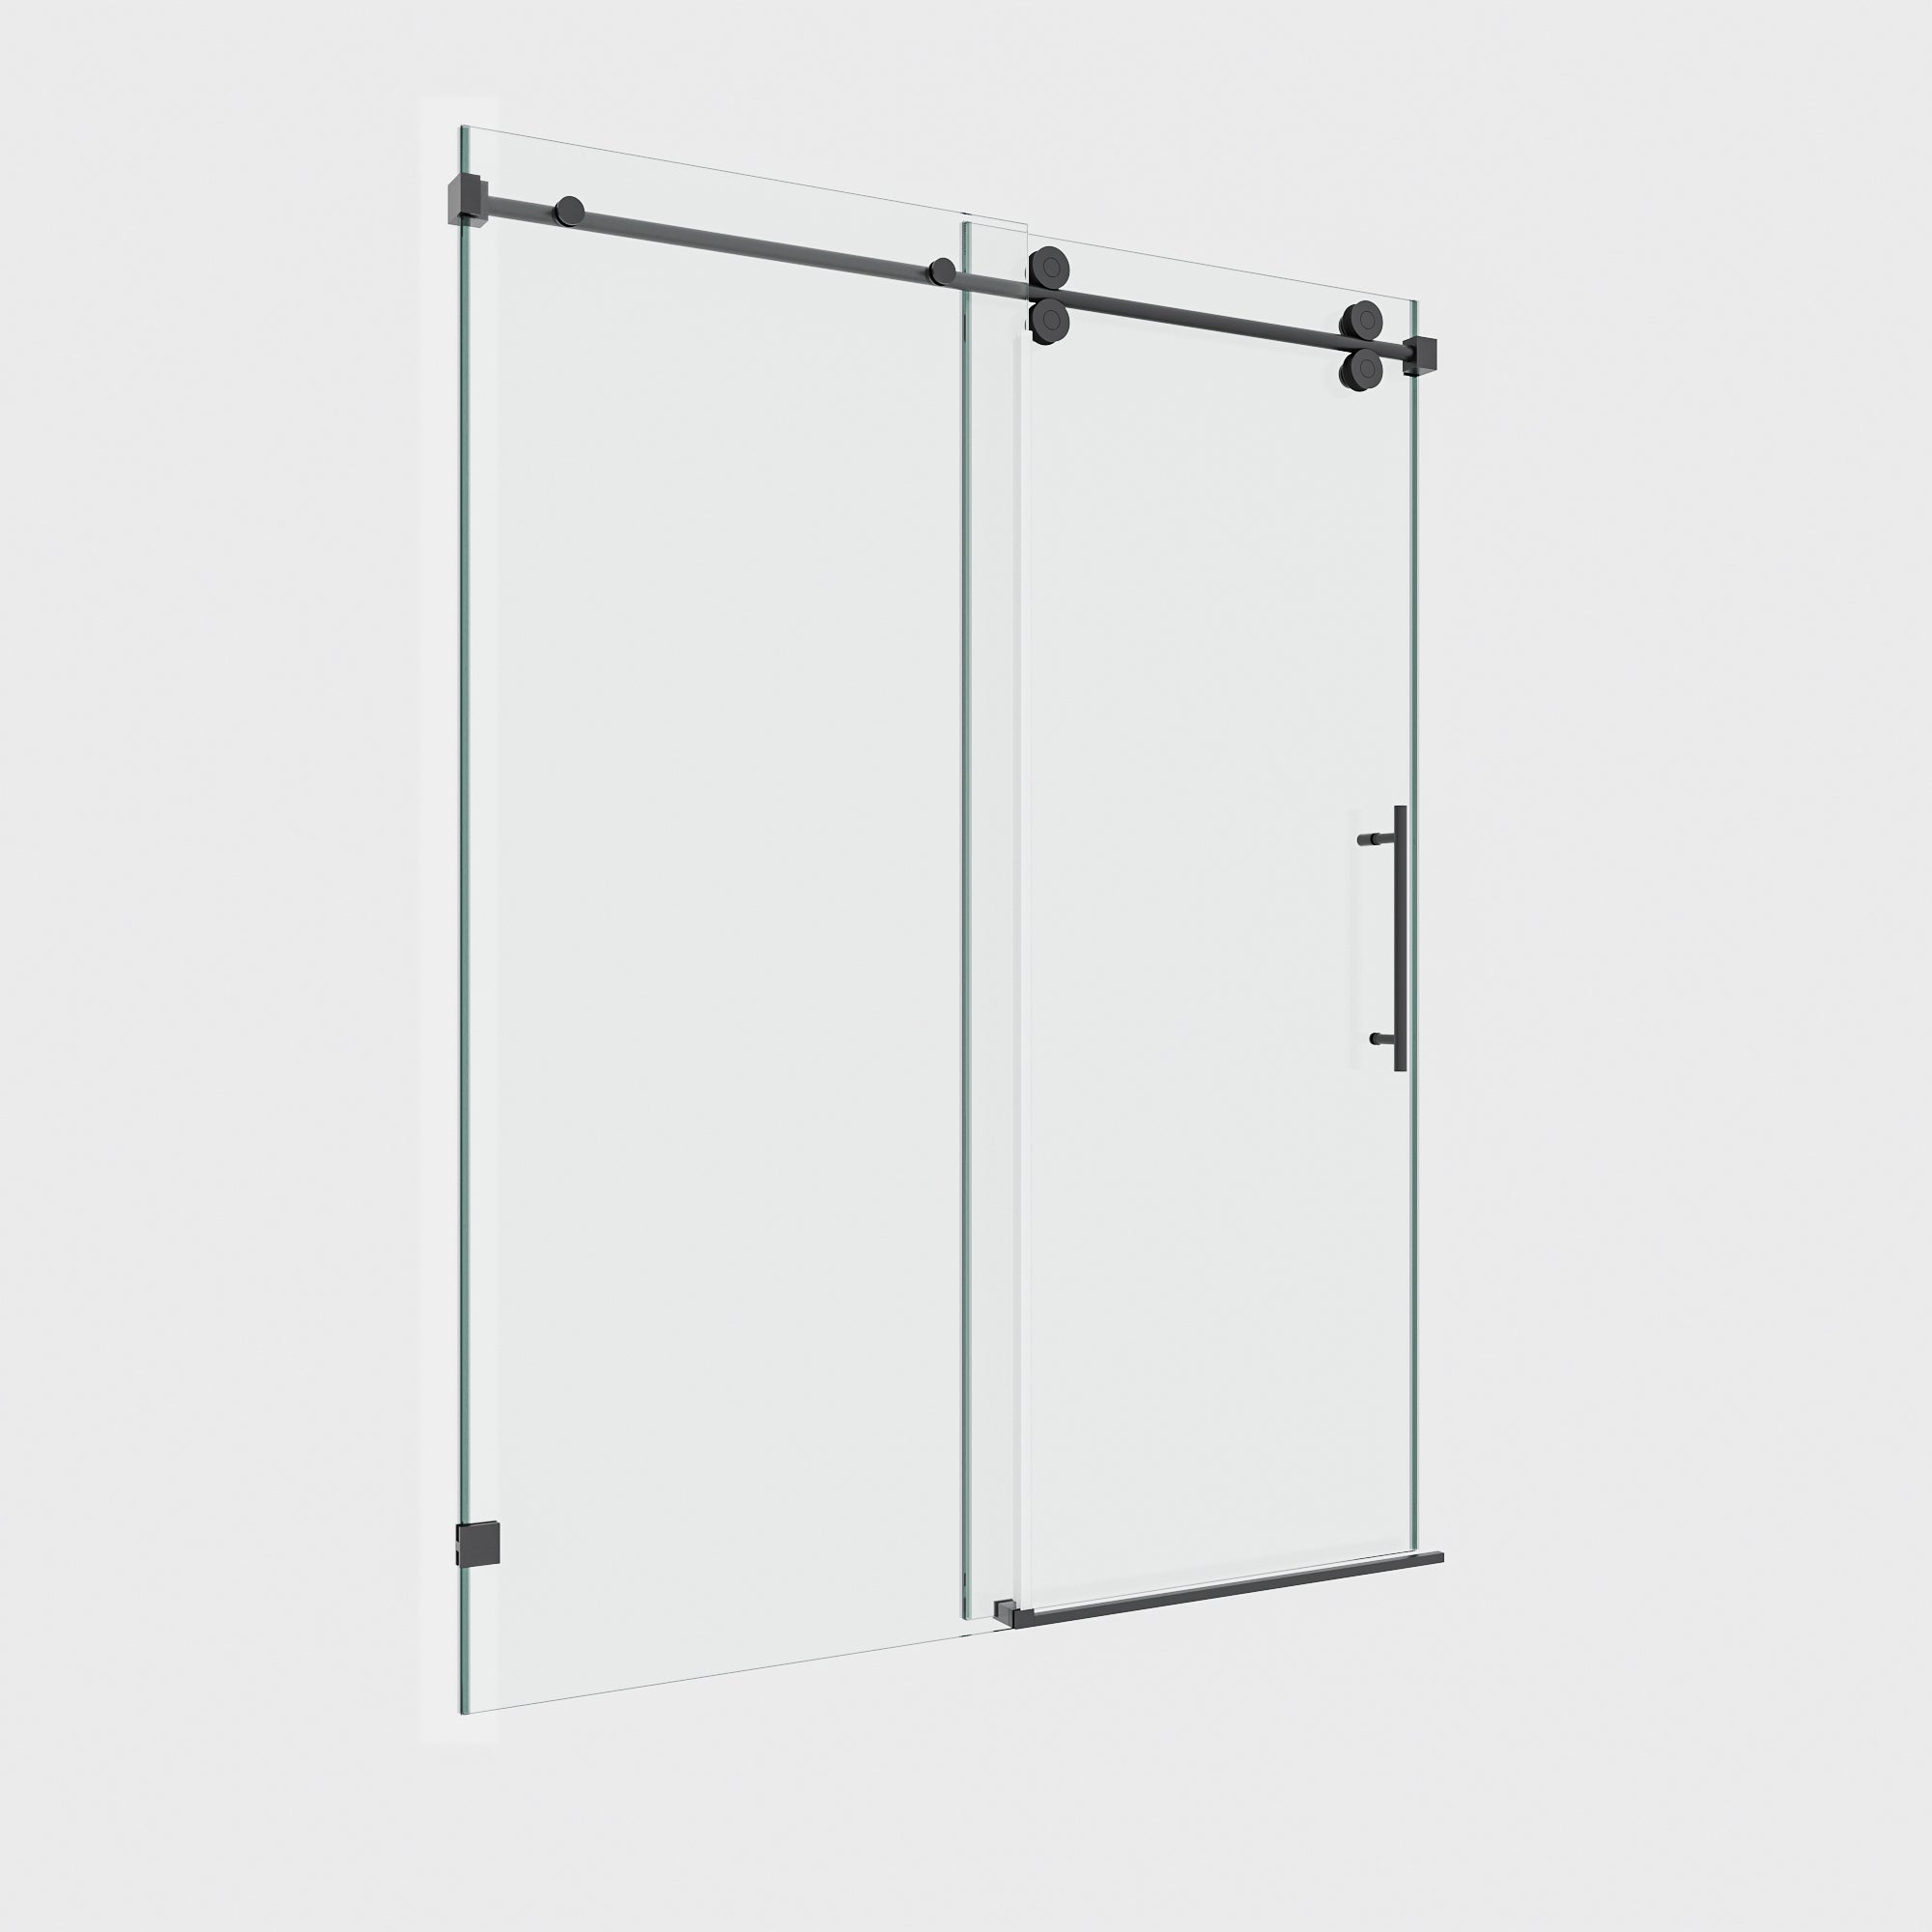 Radiance Frameless Single Sliding Shower Door with 3/8" Clear Tempered Glass